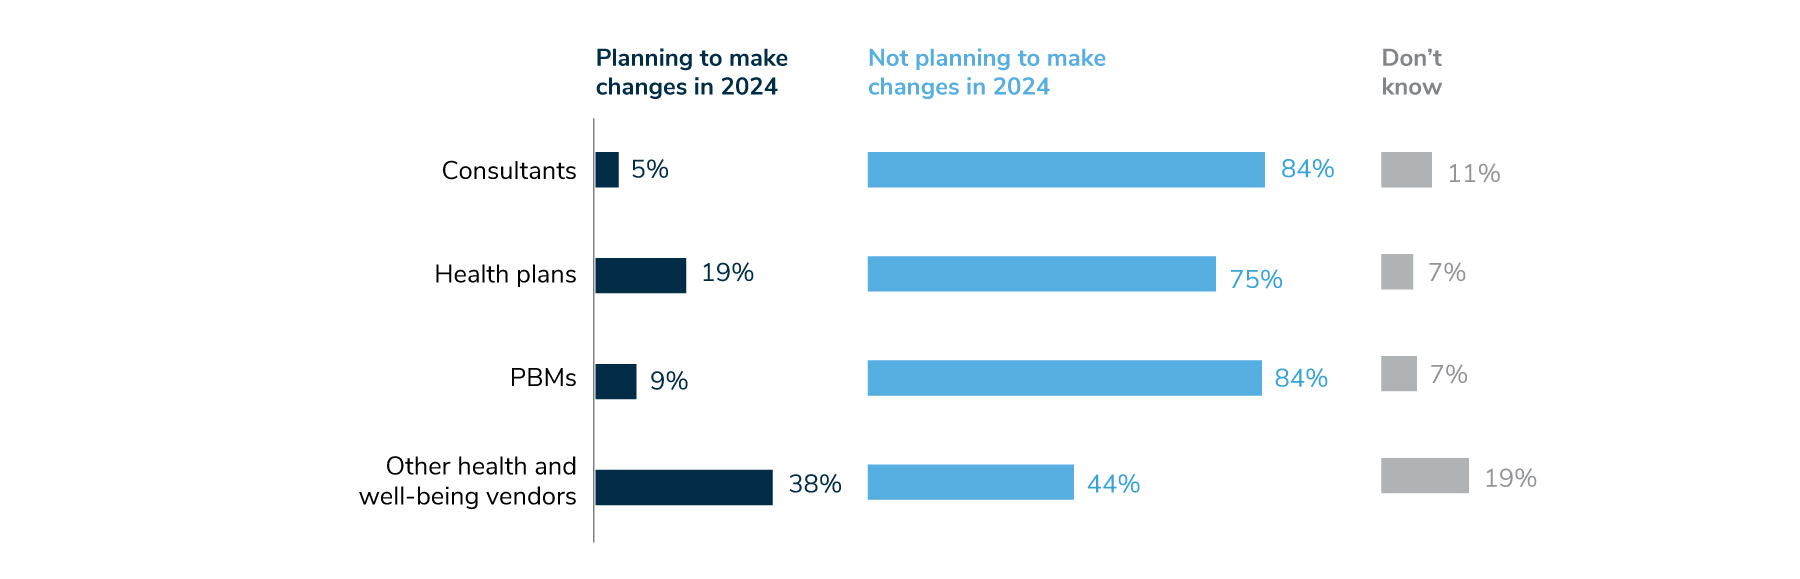 38% of employers are planning to make some kind of change with their health and well-being vendors in 2024, compared to 19% for their health plans, 9% for their PBMs, and 5% for consultants.